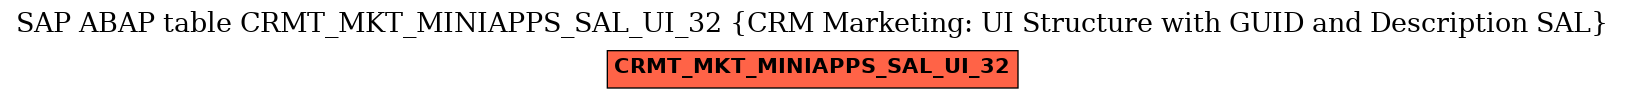 E-R Diagram for table CRMT_MKT_MINIAPPS_SAL_UI_32 (CRM Marketing: UI Structure with GUID and Description SAL)